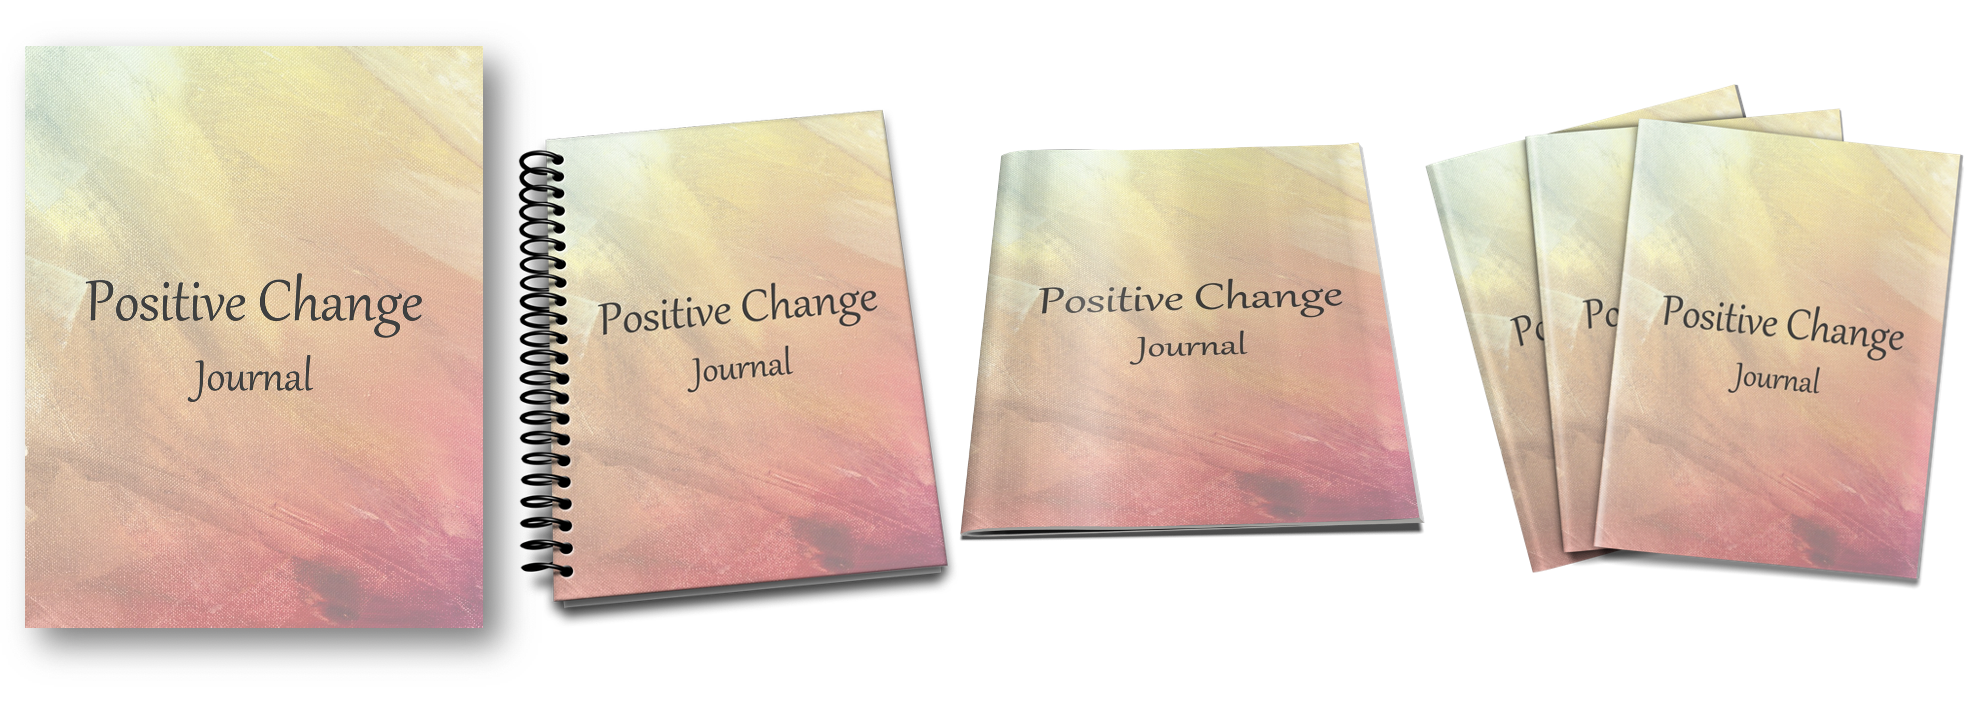 PLR Journal Covers Included